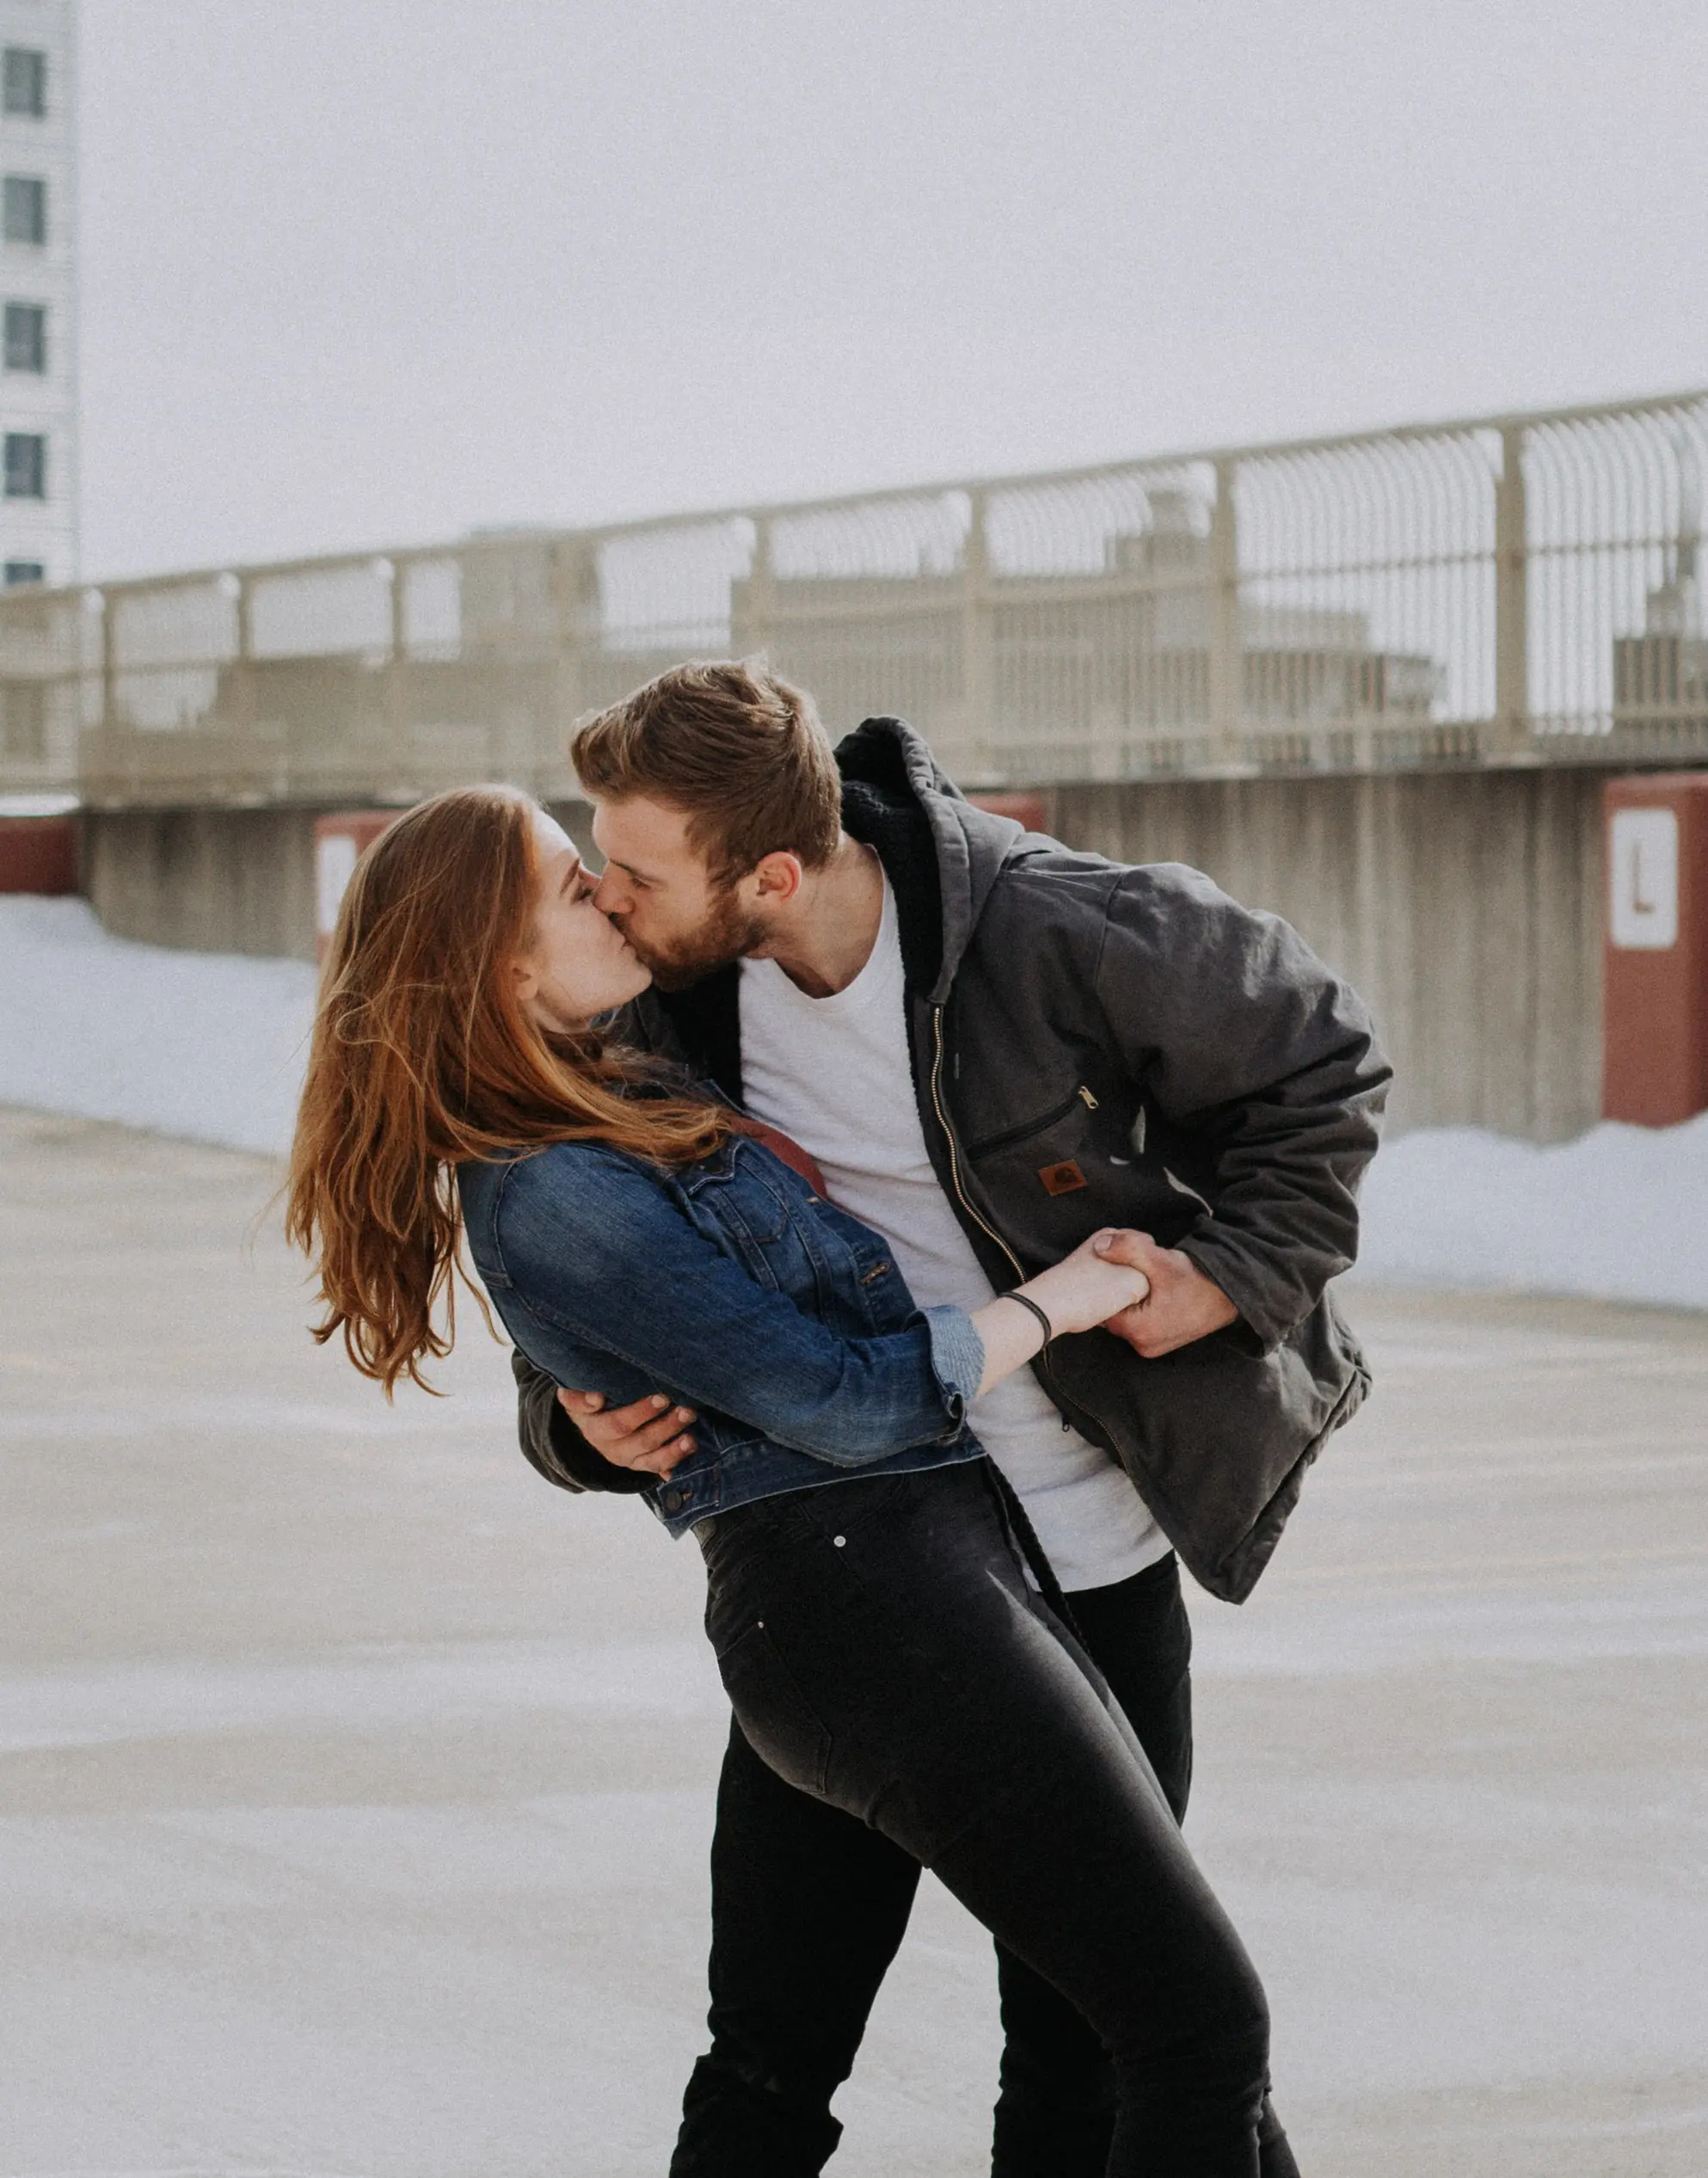 Engagement Photo Pose Ideas: Best Poses for Engagement Photos